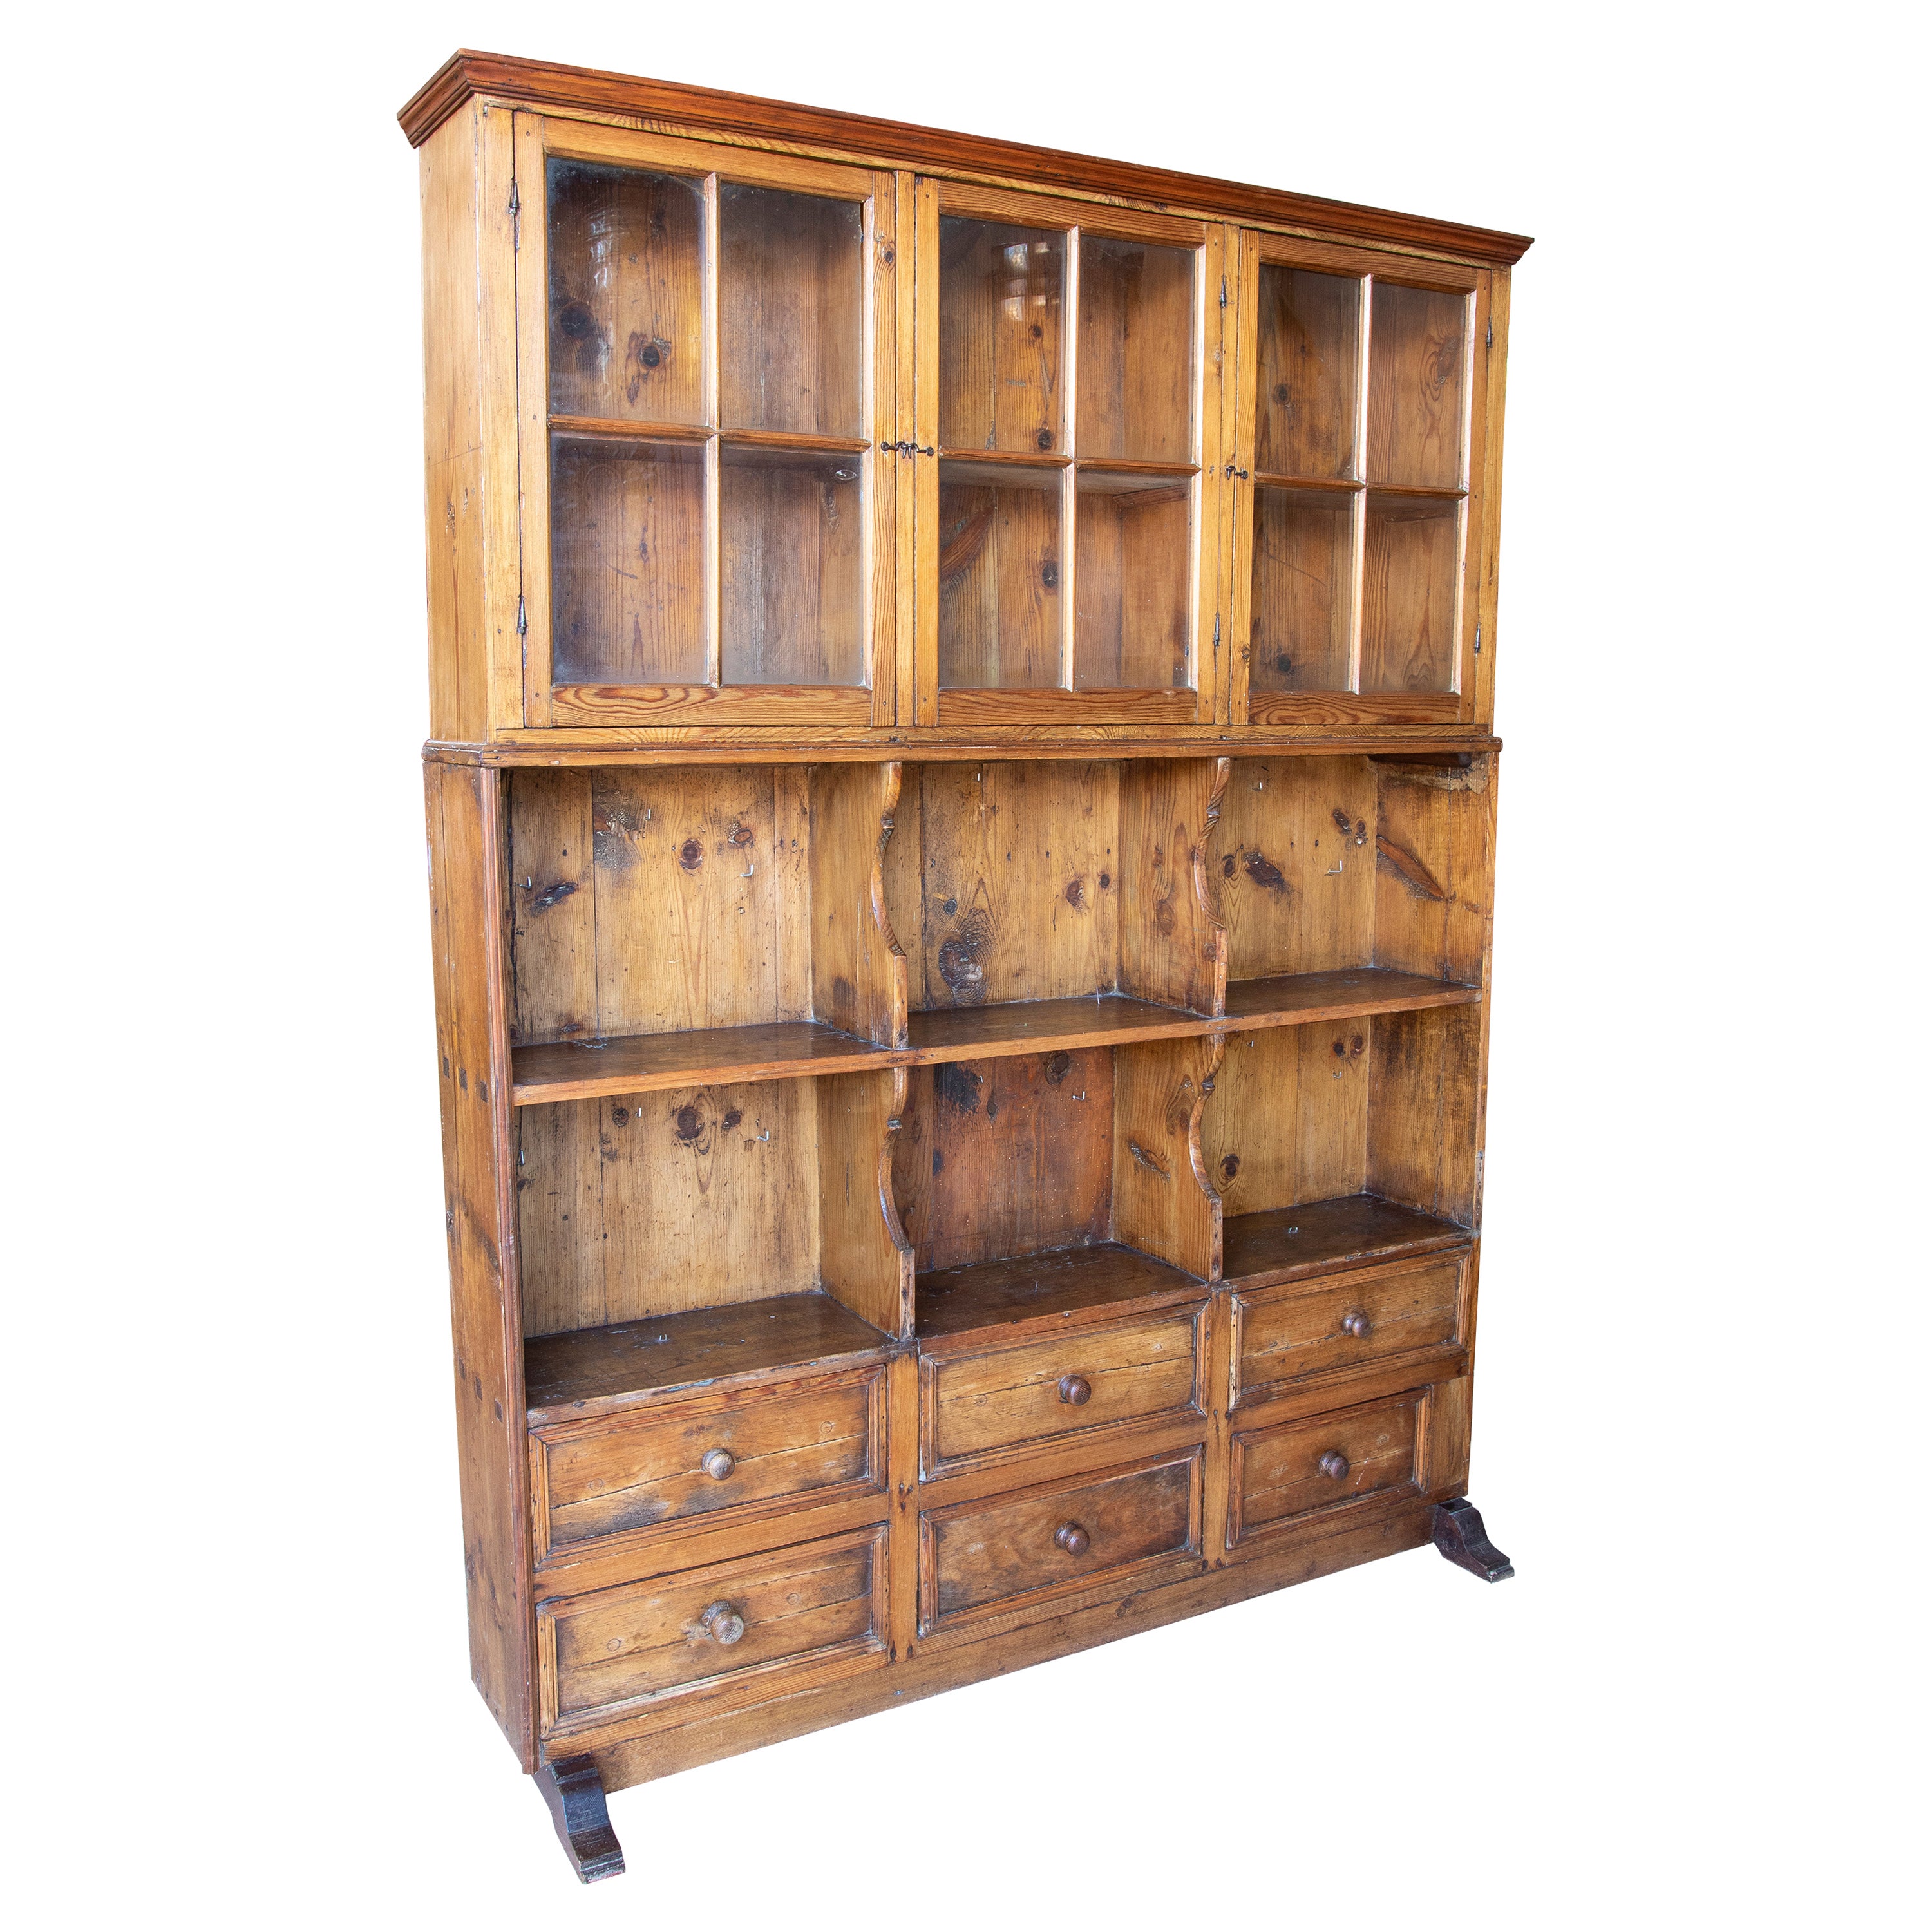 Rustic Kitchen Display Cabinet with Doors, Shelves and Drawers in the Lower Part For Sale